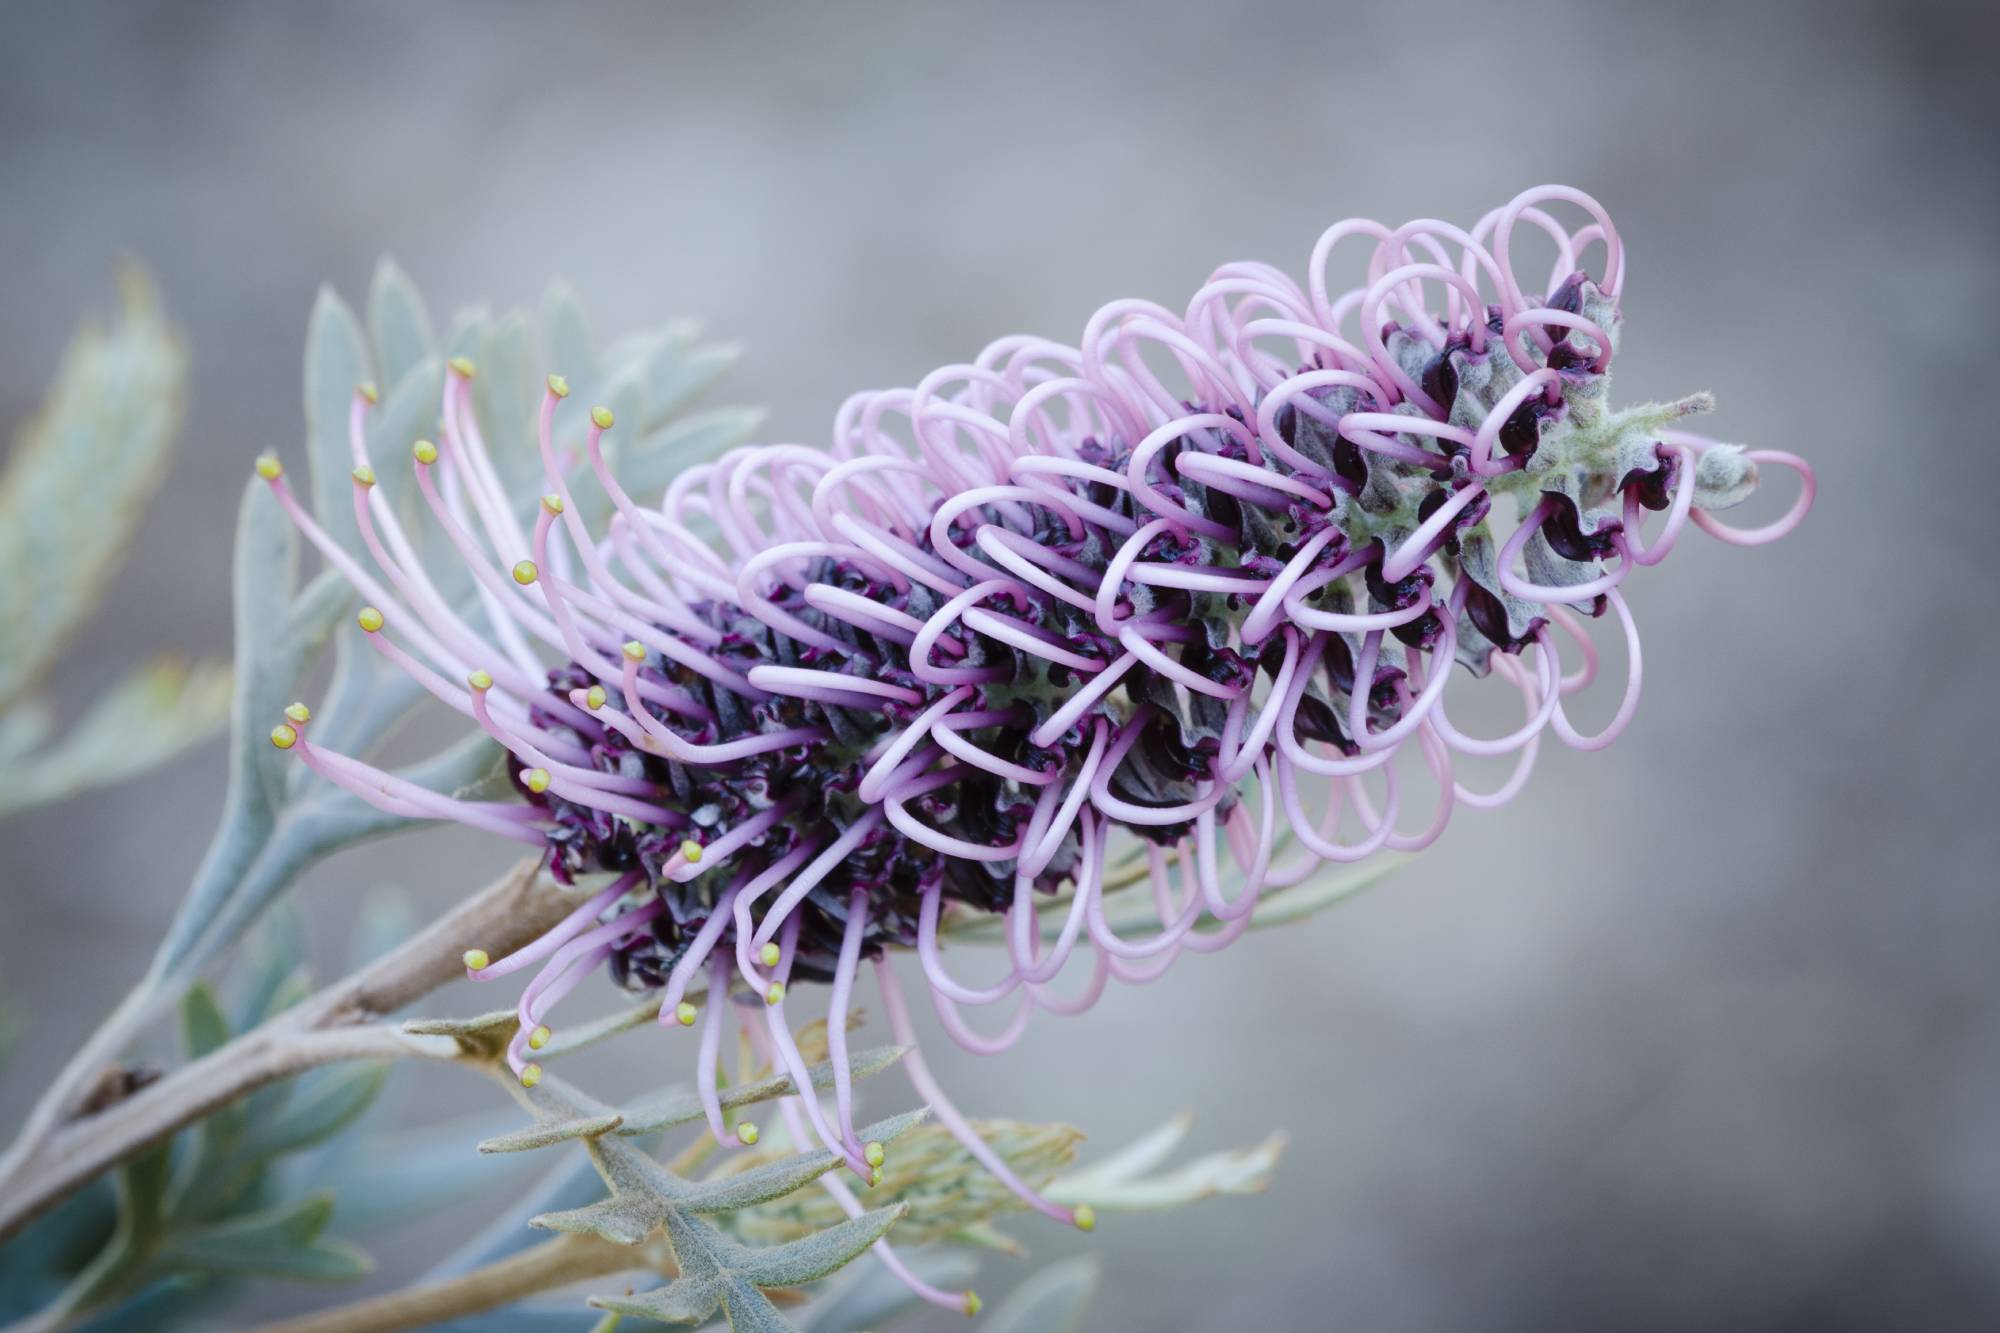 Grevillea 'Dorothy Gordon' is a large new australian shrub which bears mauve blooms for most of the year to attract honey eaters, birds and possums. Flowers are useful for floral arrangements.